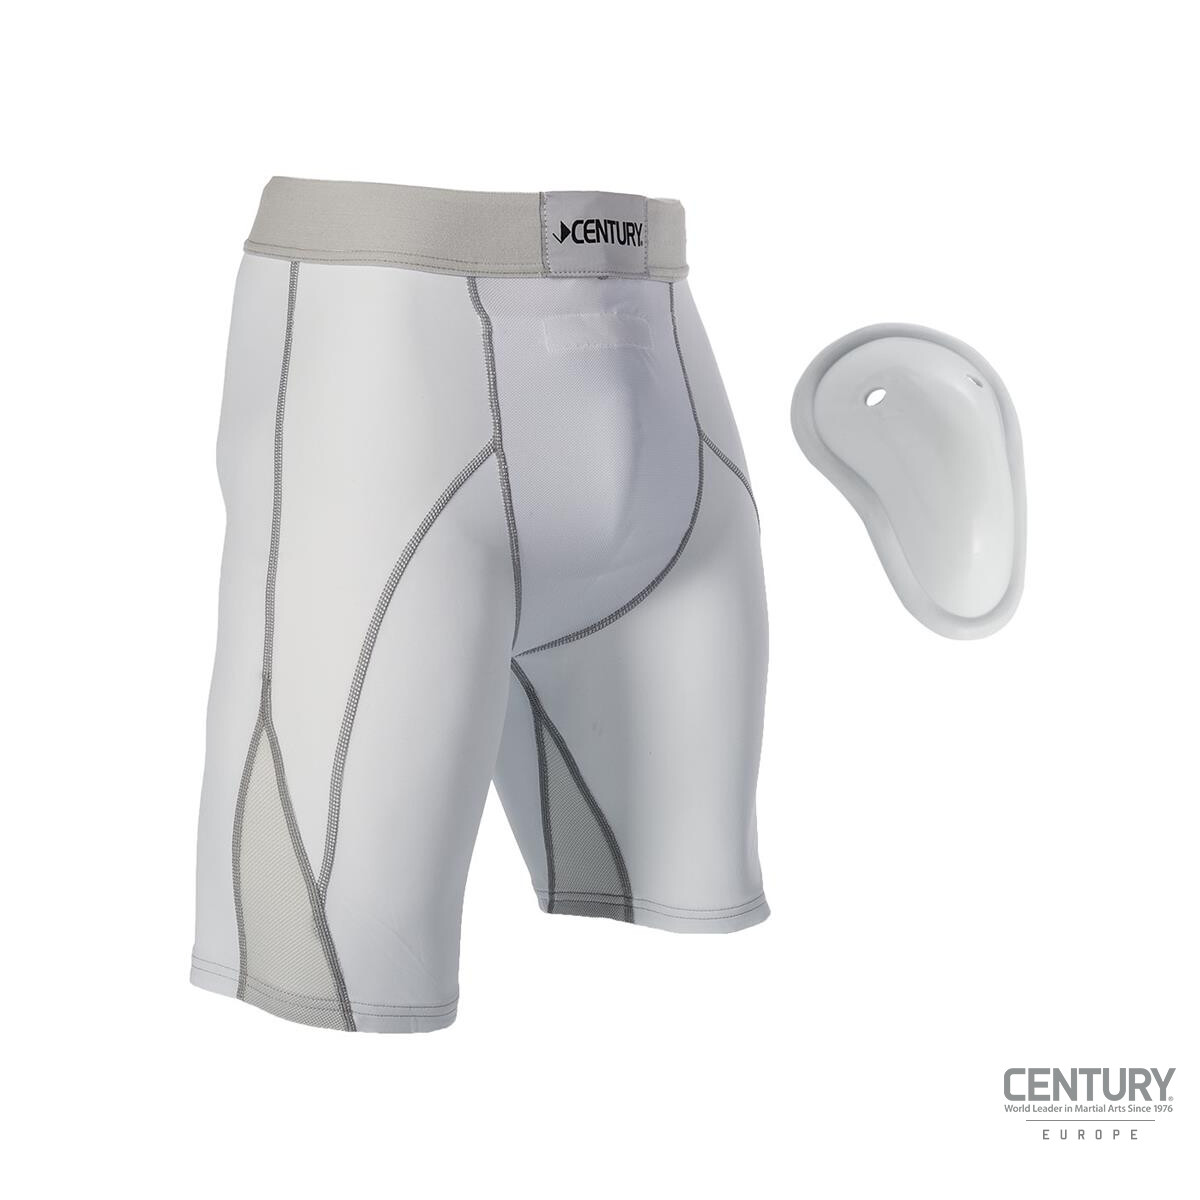 Century® Compressionsshort with Cup L